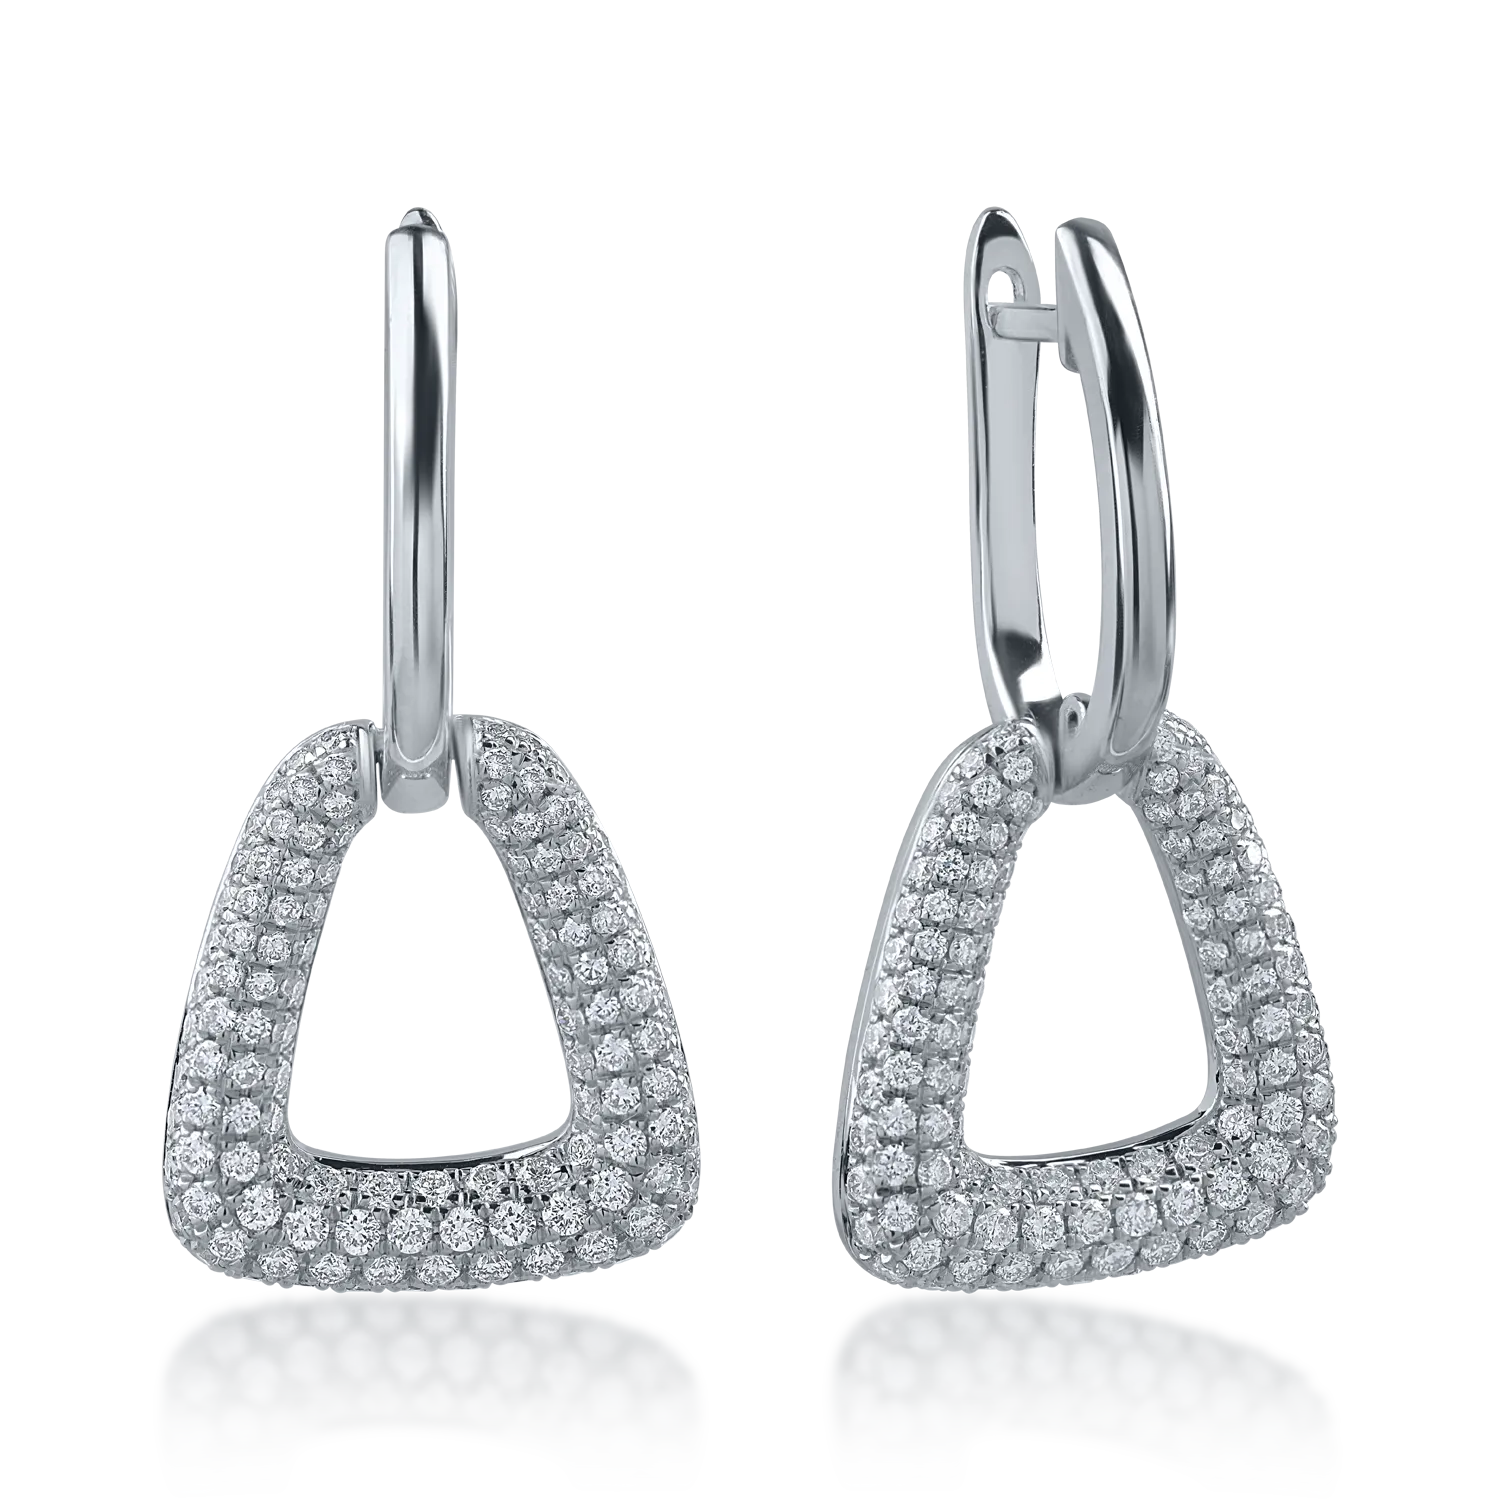 White gold earrings with 1.02ct diamonds